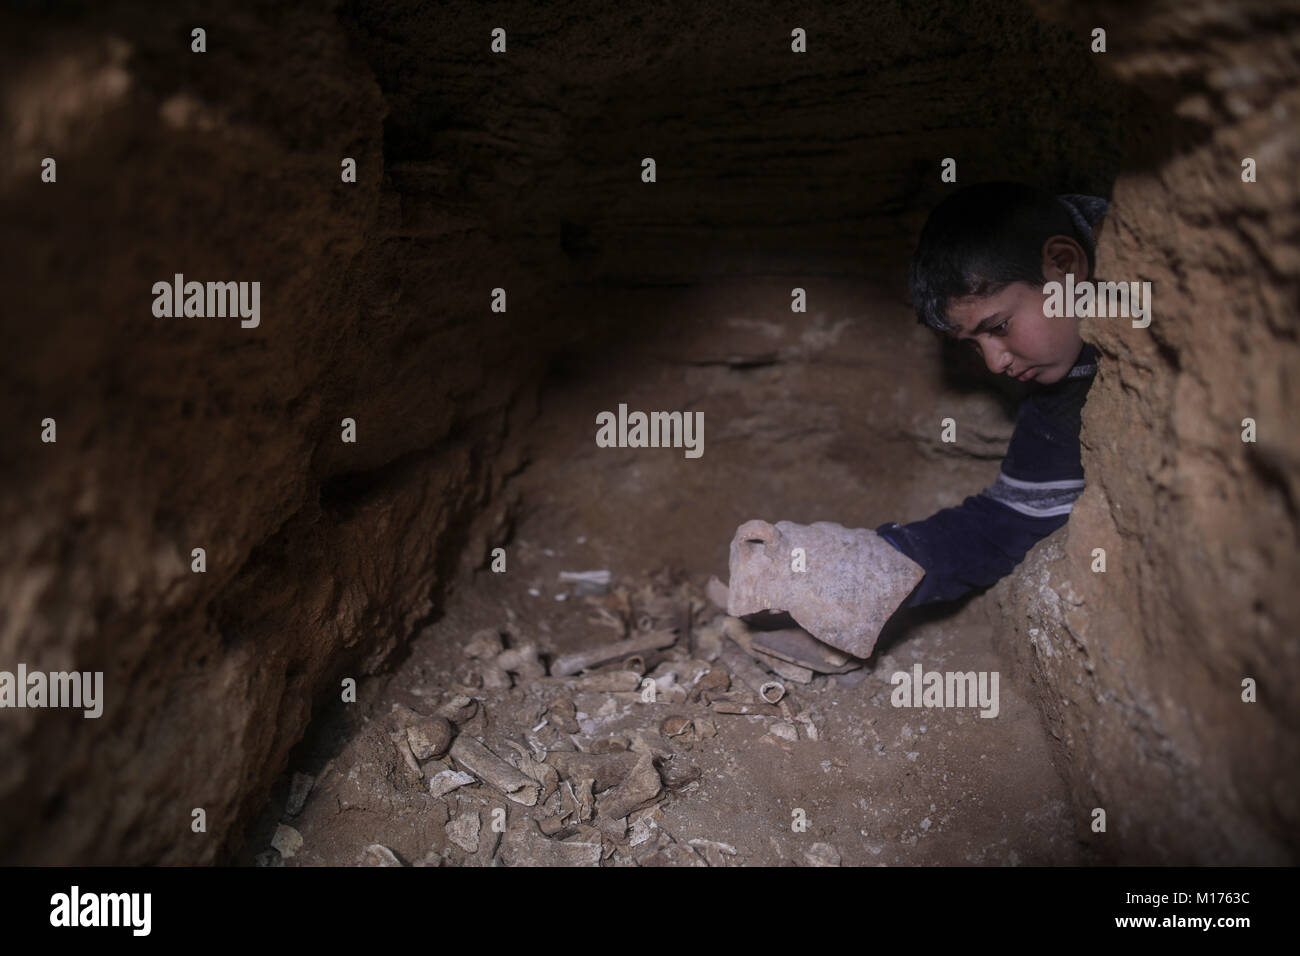 Beit Hanoun, Northern Gaza City. 27th Jan, 2018. A Palestinian boy checks potteries and bones found in a discovered tomb consisting of nine burial holes, in Beit Hanoun, Northern Gaza City, 27 January 2018. Archaeologists in Gaza say they believe the graveyard is about 2,000-year-old, dating back to the Roman era, where Gaza was part of the far-flung Roman Empire. Further tests are to be carried out to determine THE exact age. Credit: Wissam Nassar/dpa/Alamy Live News Stock Photo